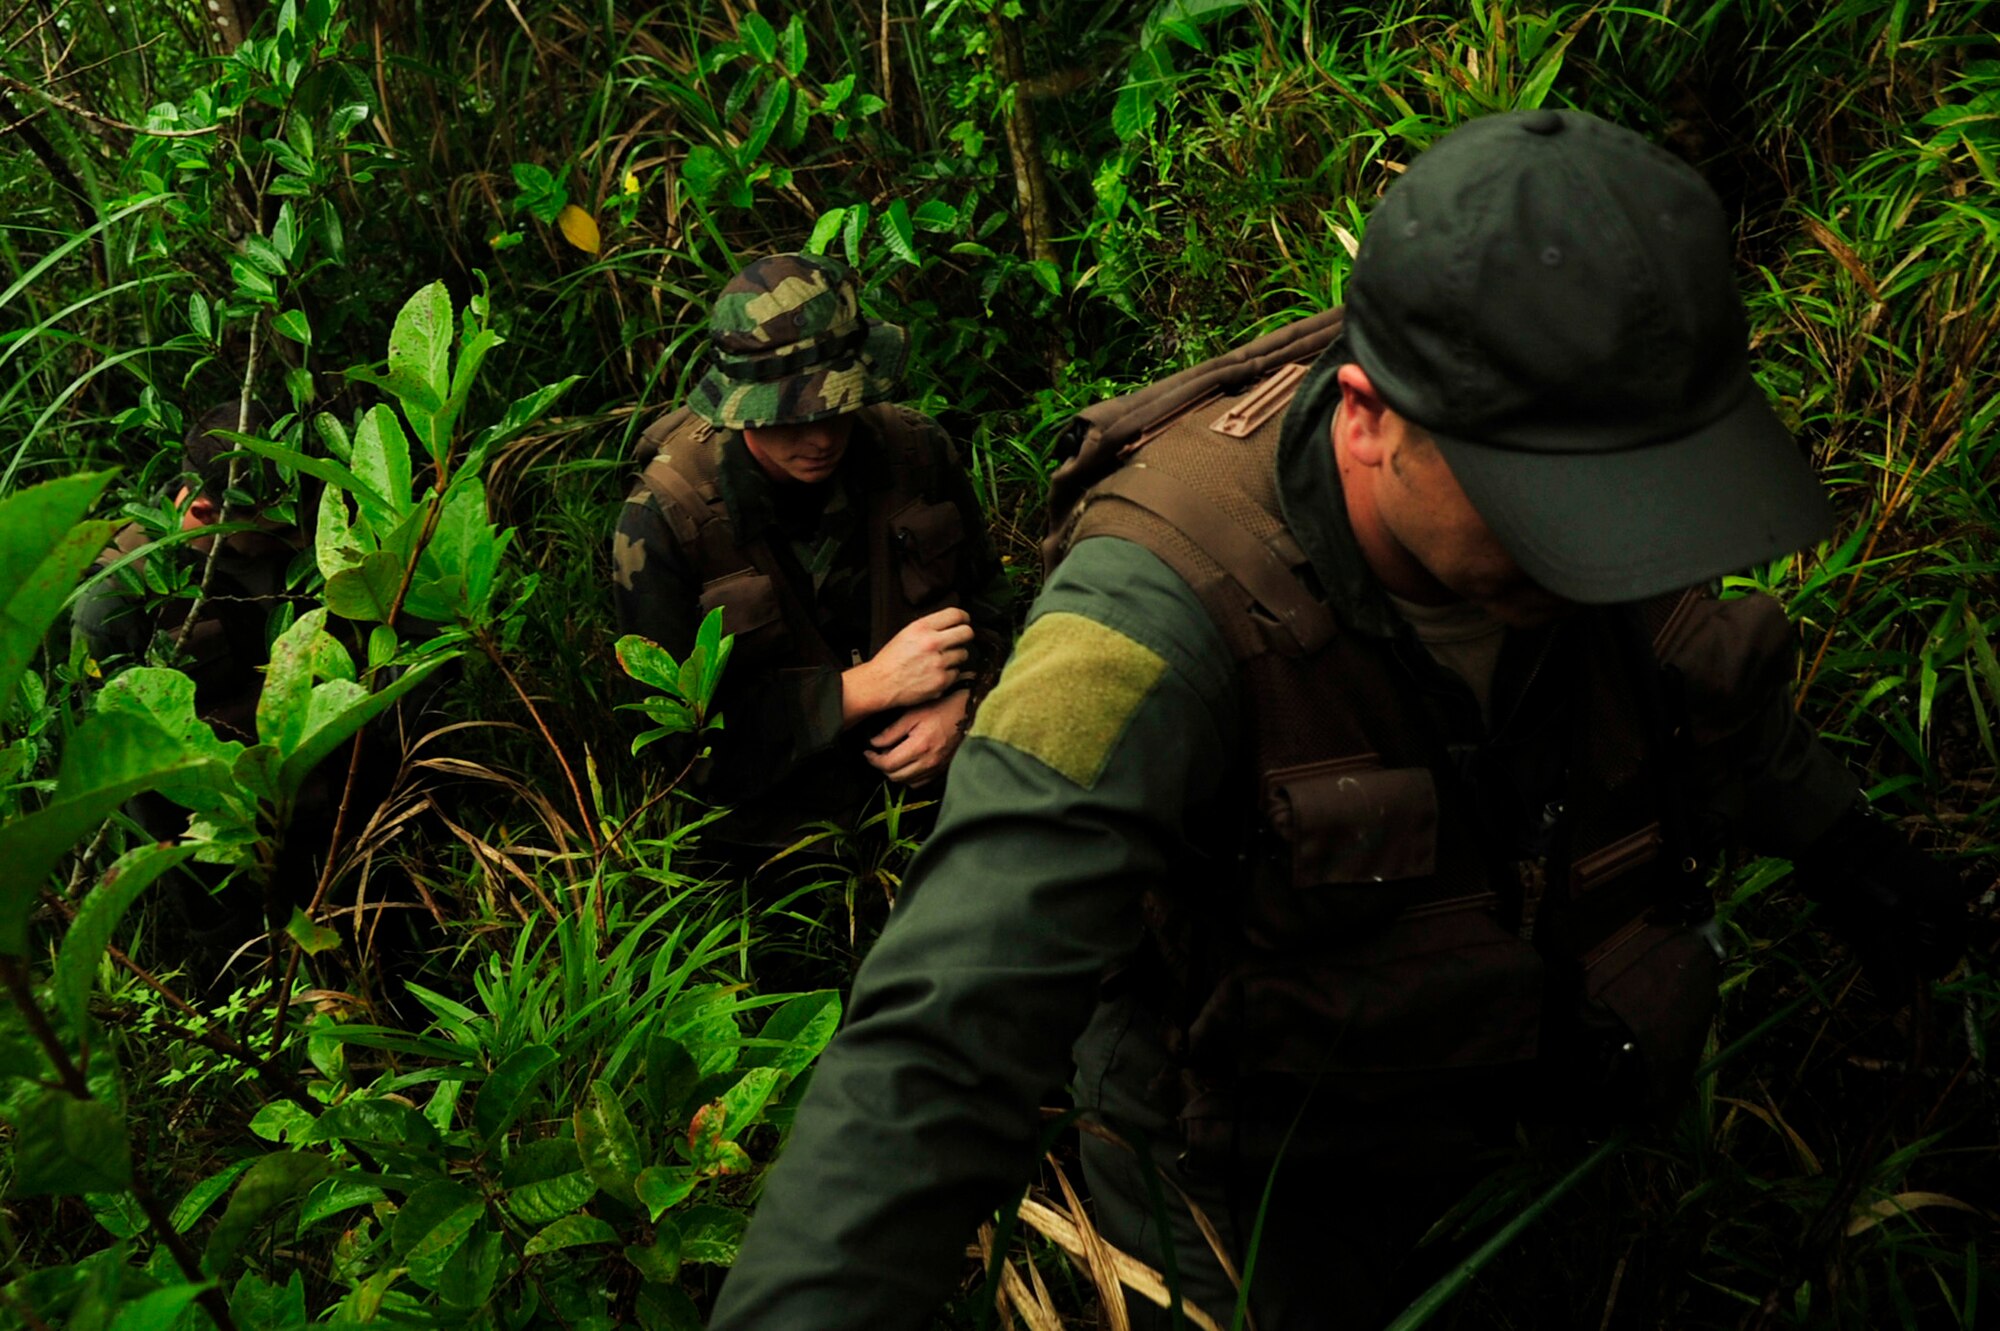 Master Sgt. John Matye (right), member of the 17th Special Operations Squadron, Staff Sgt. James Kosnosky (middle), member of the 1st Special Operations Squadron, and Airman 1st Class Michael Mendes, member or the 17th Special Operations Squadron, trek through the jungles of Area 1 during a survival, evasion, resistance, and escape exercise at Kadena Air Base July 1. Every three years aircrew members must undergo a refresher course of SERE training. (U.S. Air Force photo by Senior Airman Amanda Grabiec)